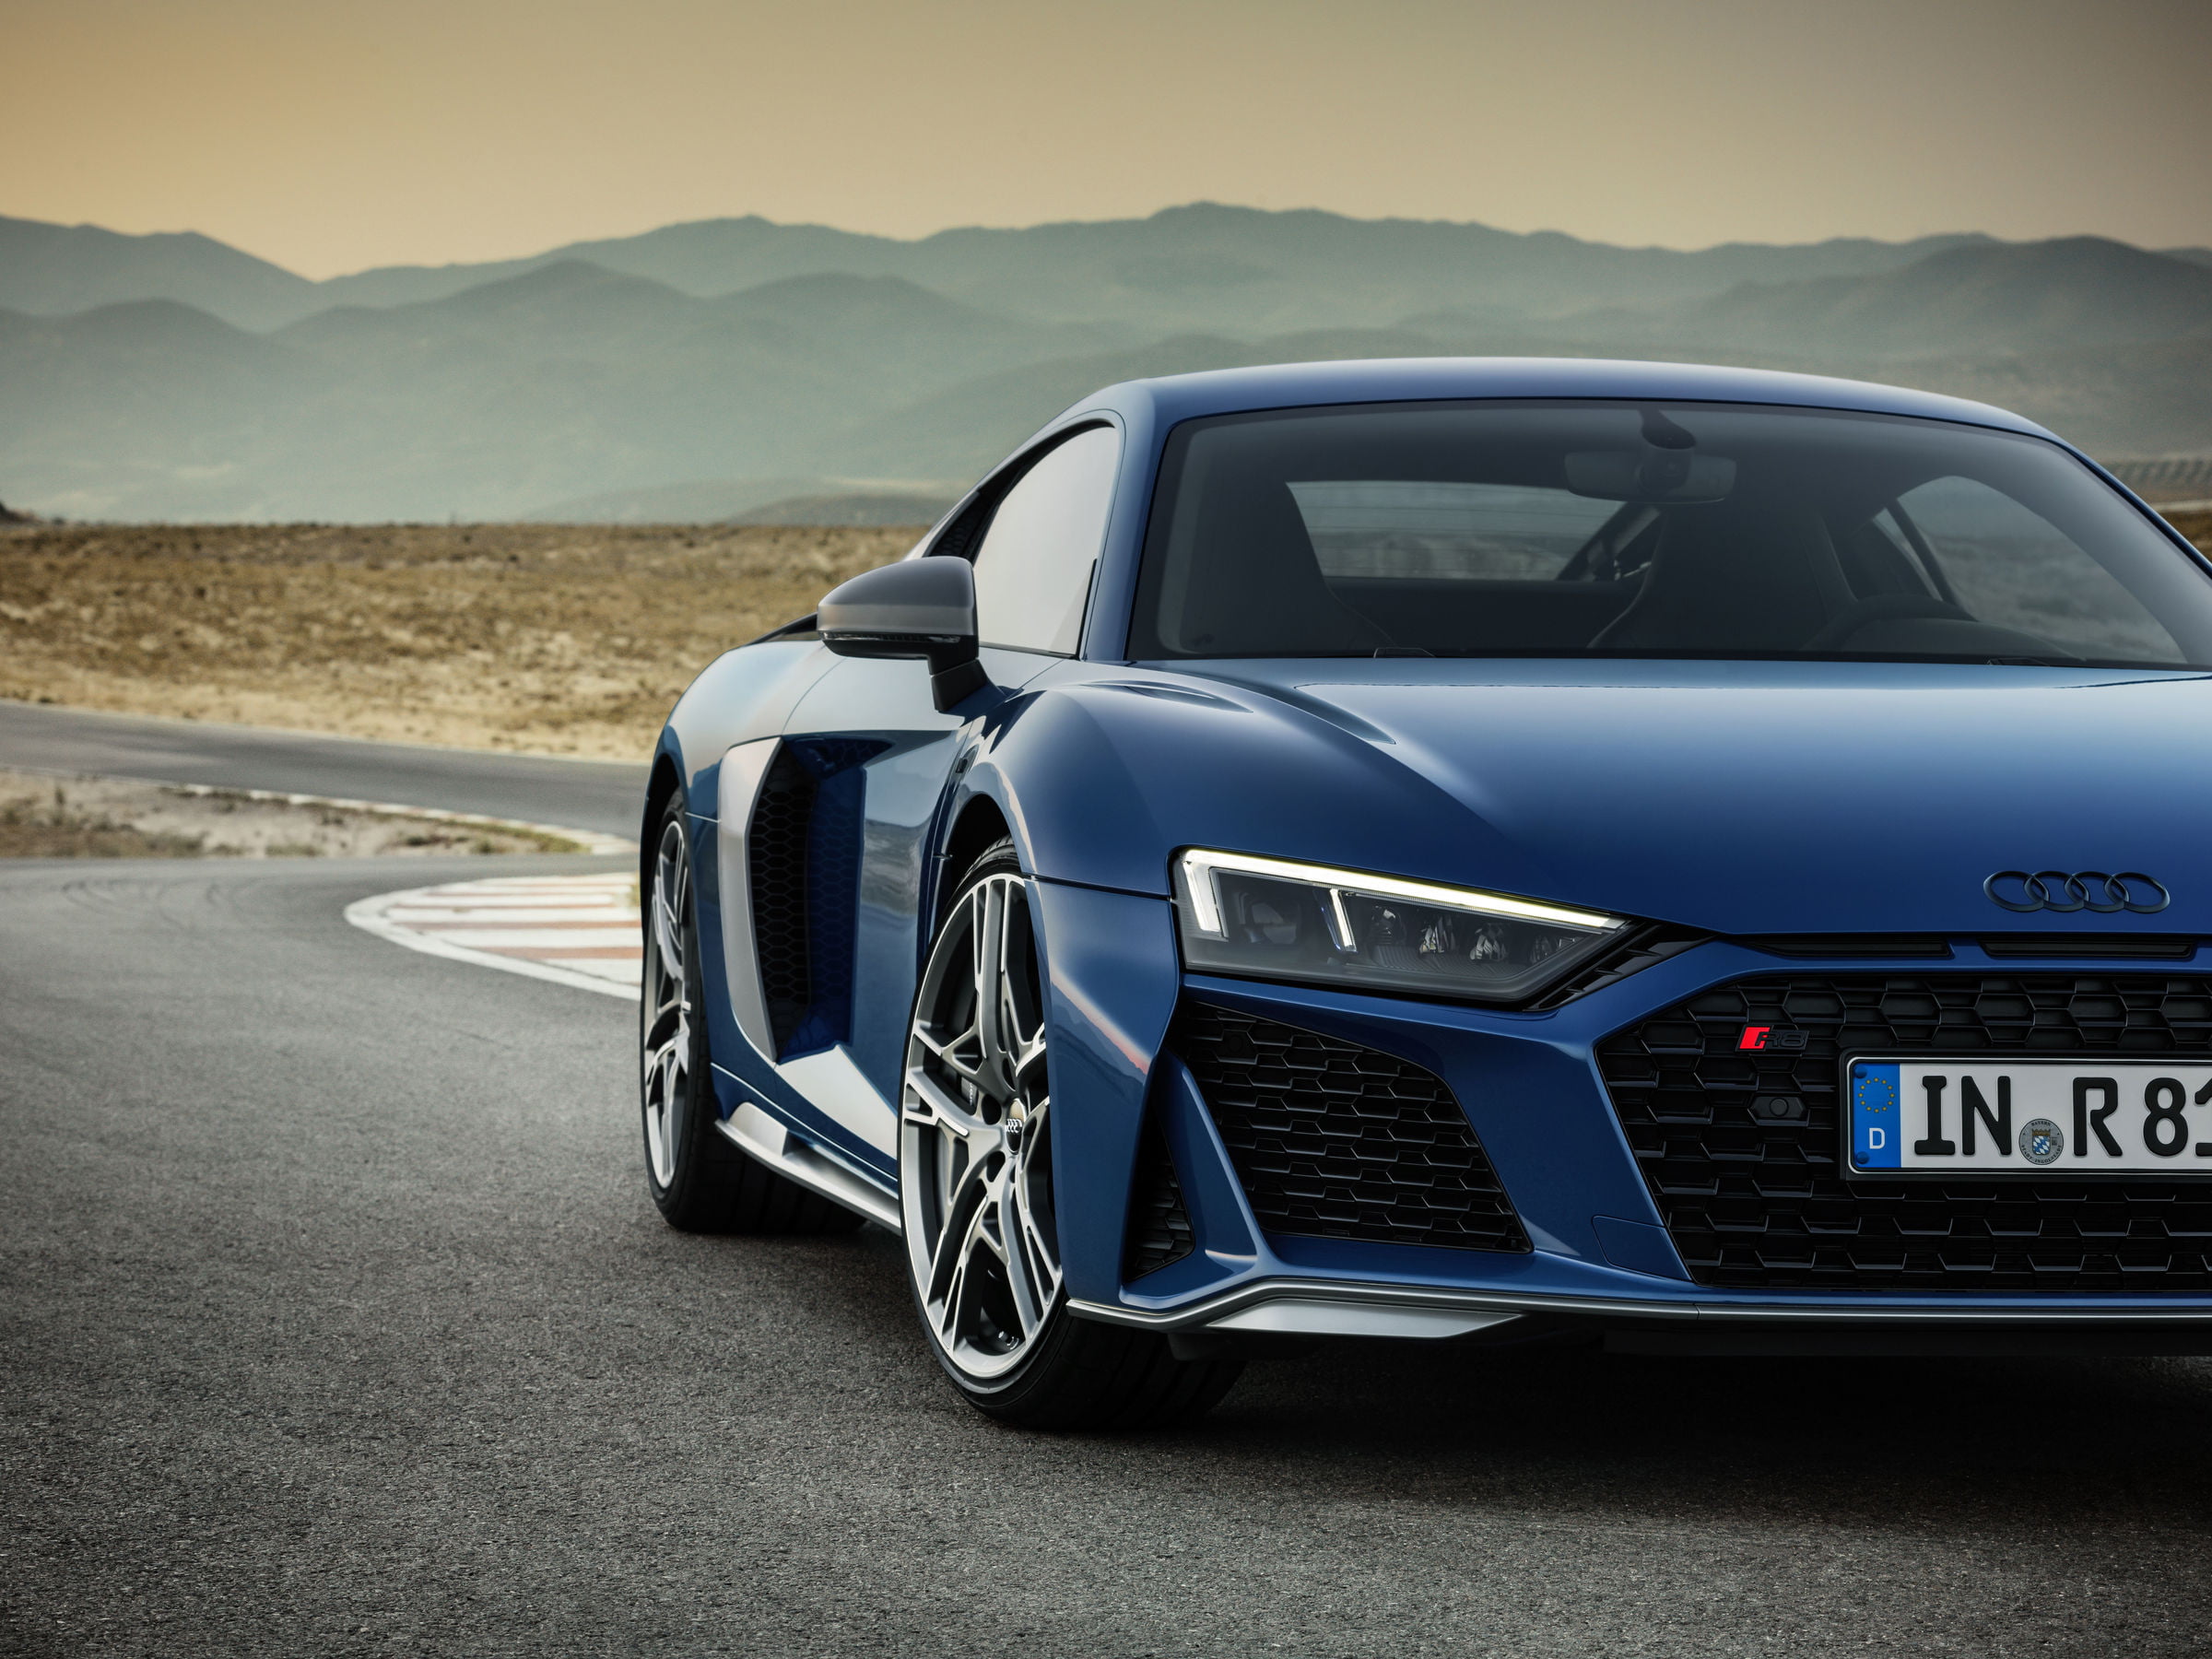 An updated Audi R8 revealed